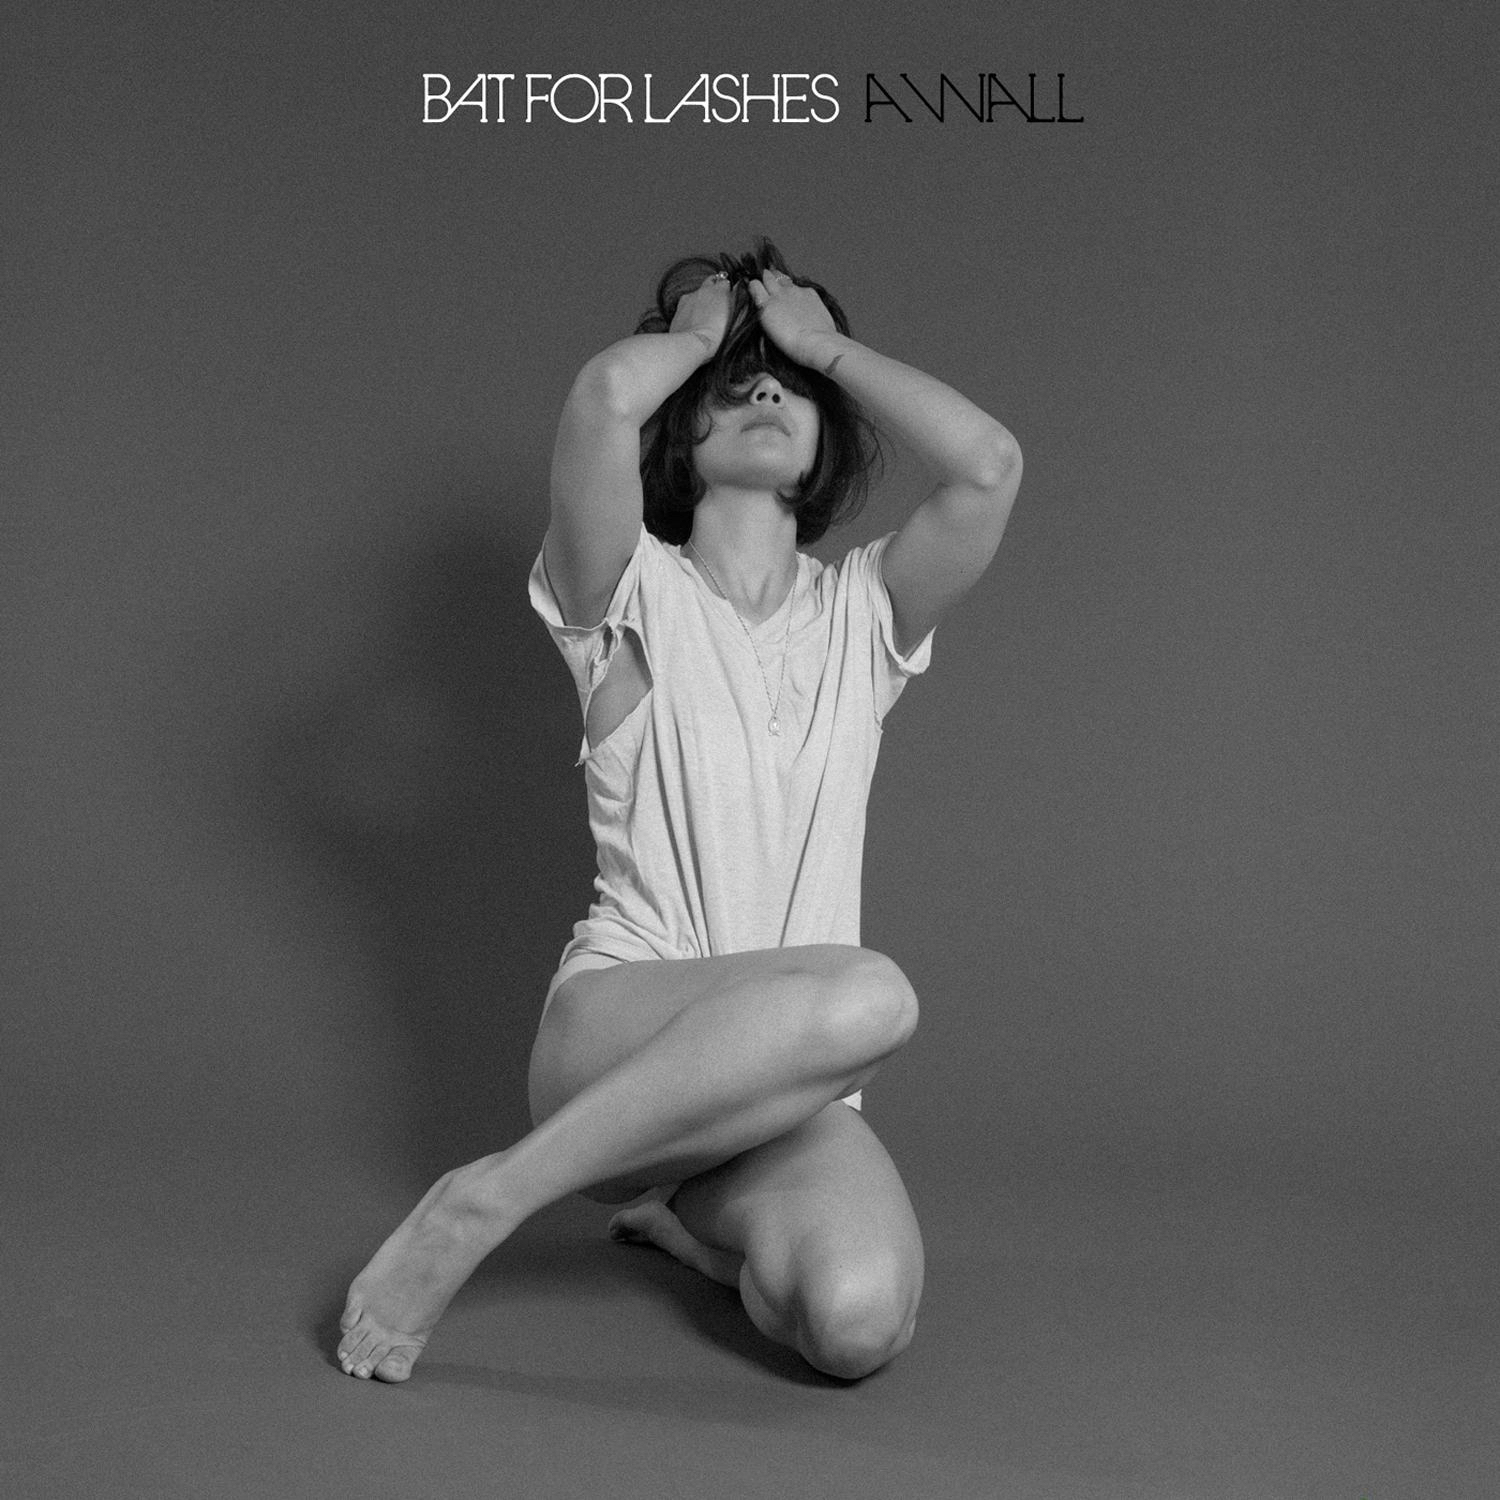 Bat for Lashes — A Wall cover artwork